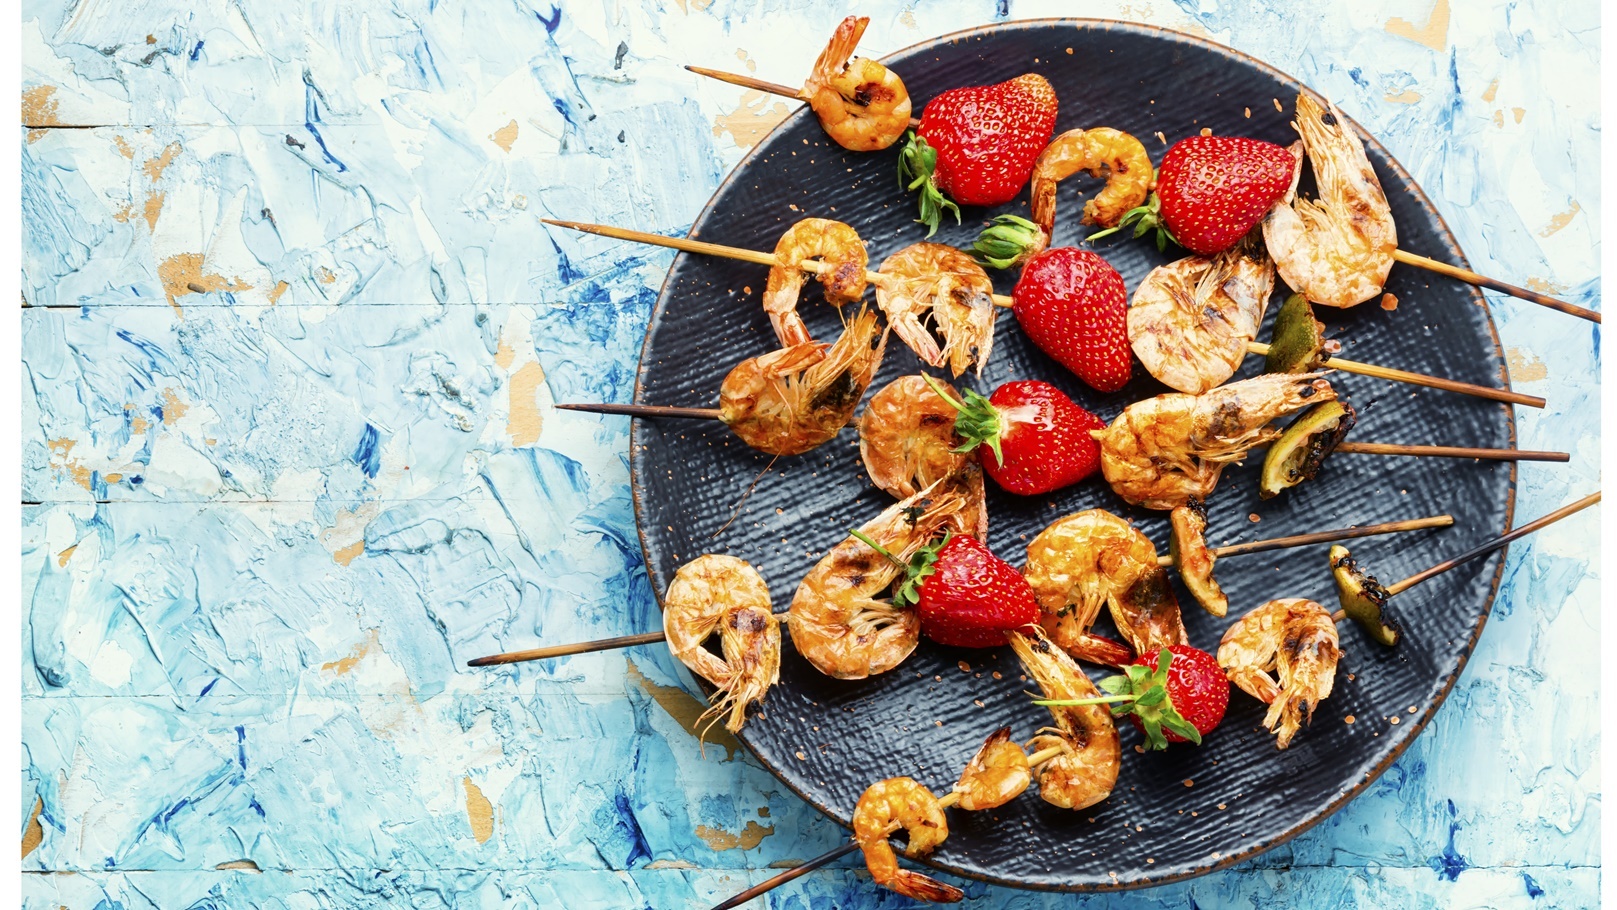 grilled-shrimps-on-skewers-with-strawberries-bbq-s-2021-09-03-14-39-05-utc